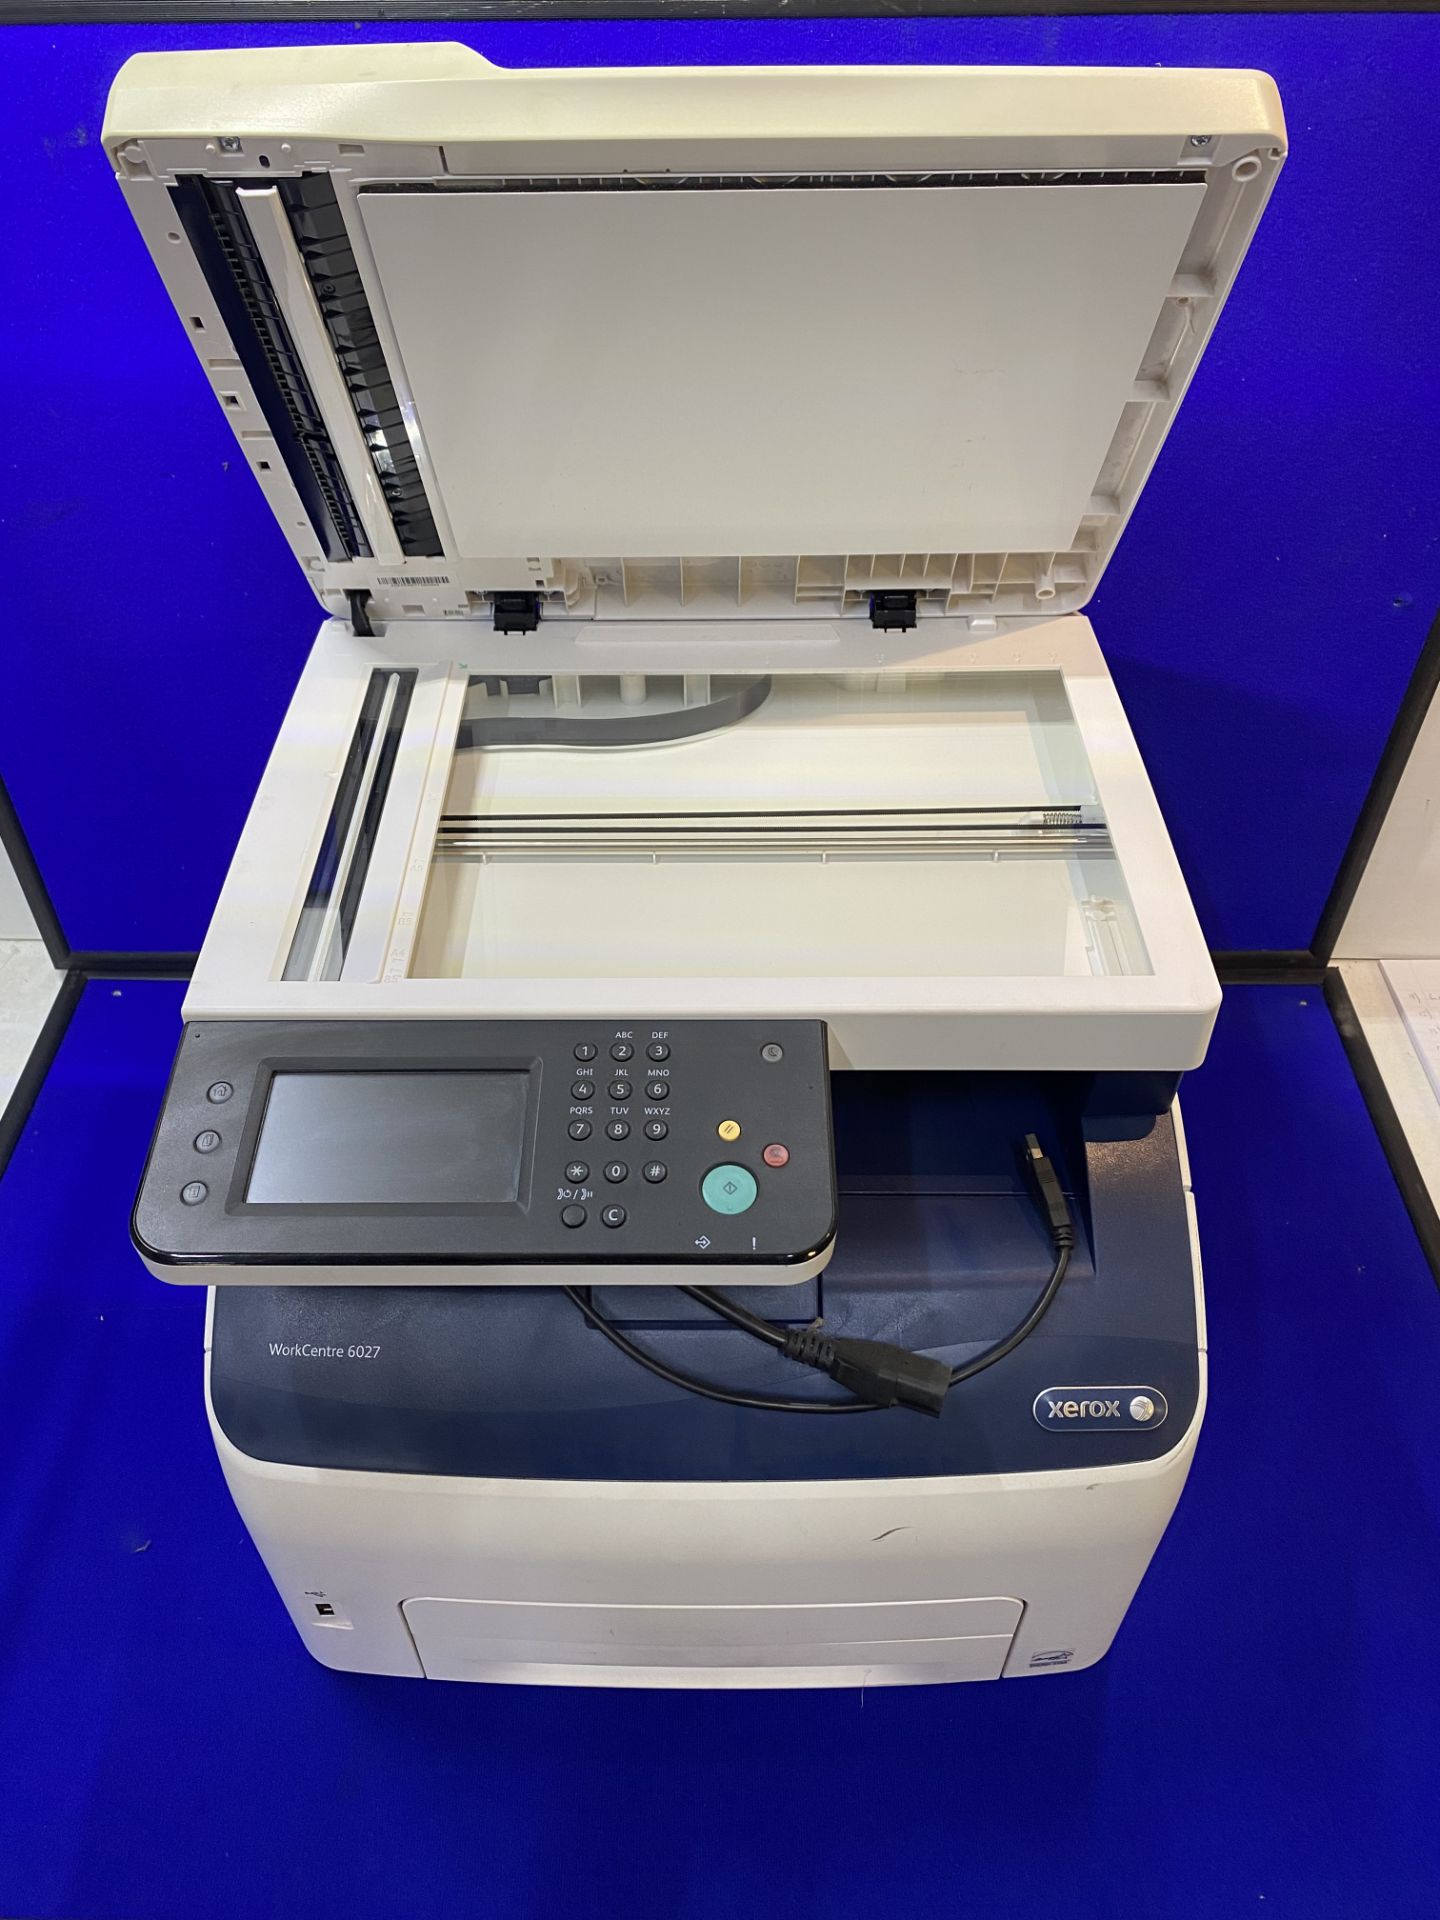 Xerox WorkCentre 6027 A4 Colour Multifunction Laser Printer - Image 8 of 22